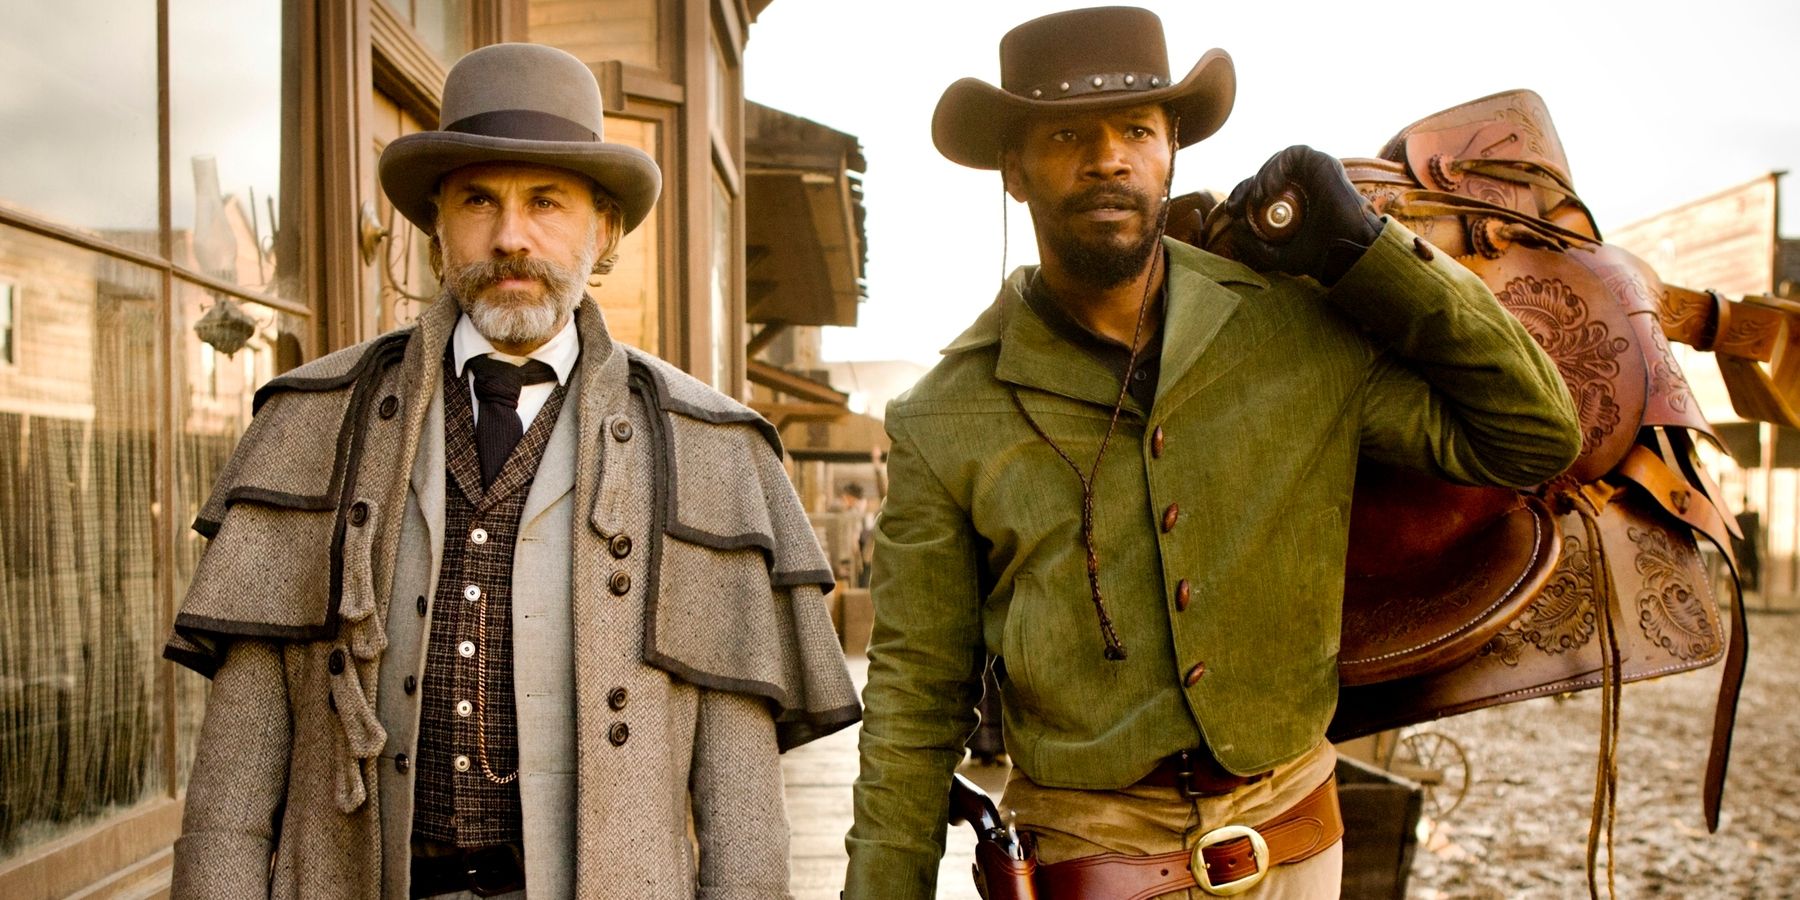 Is Django Unchained Based On A True Story